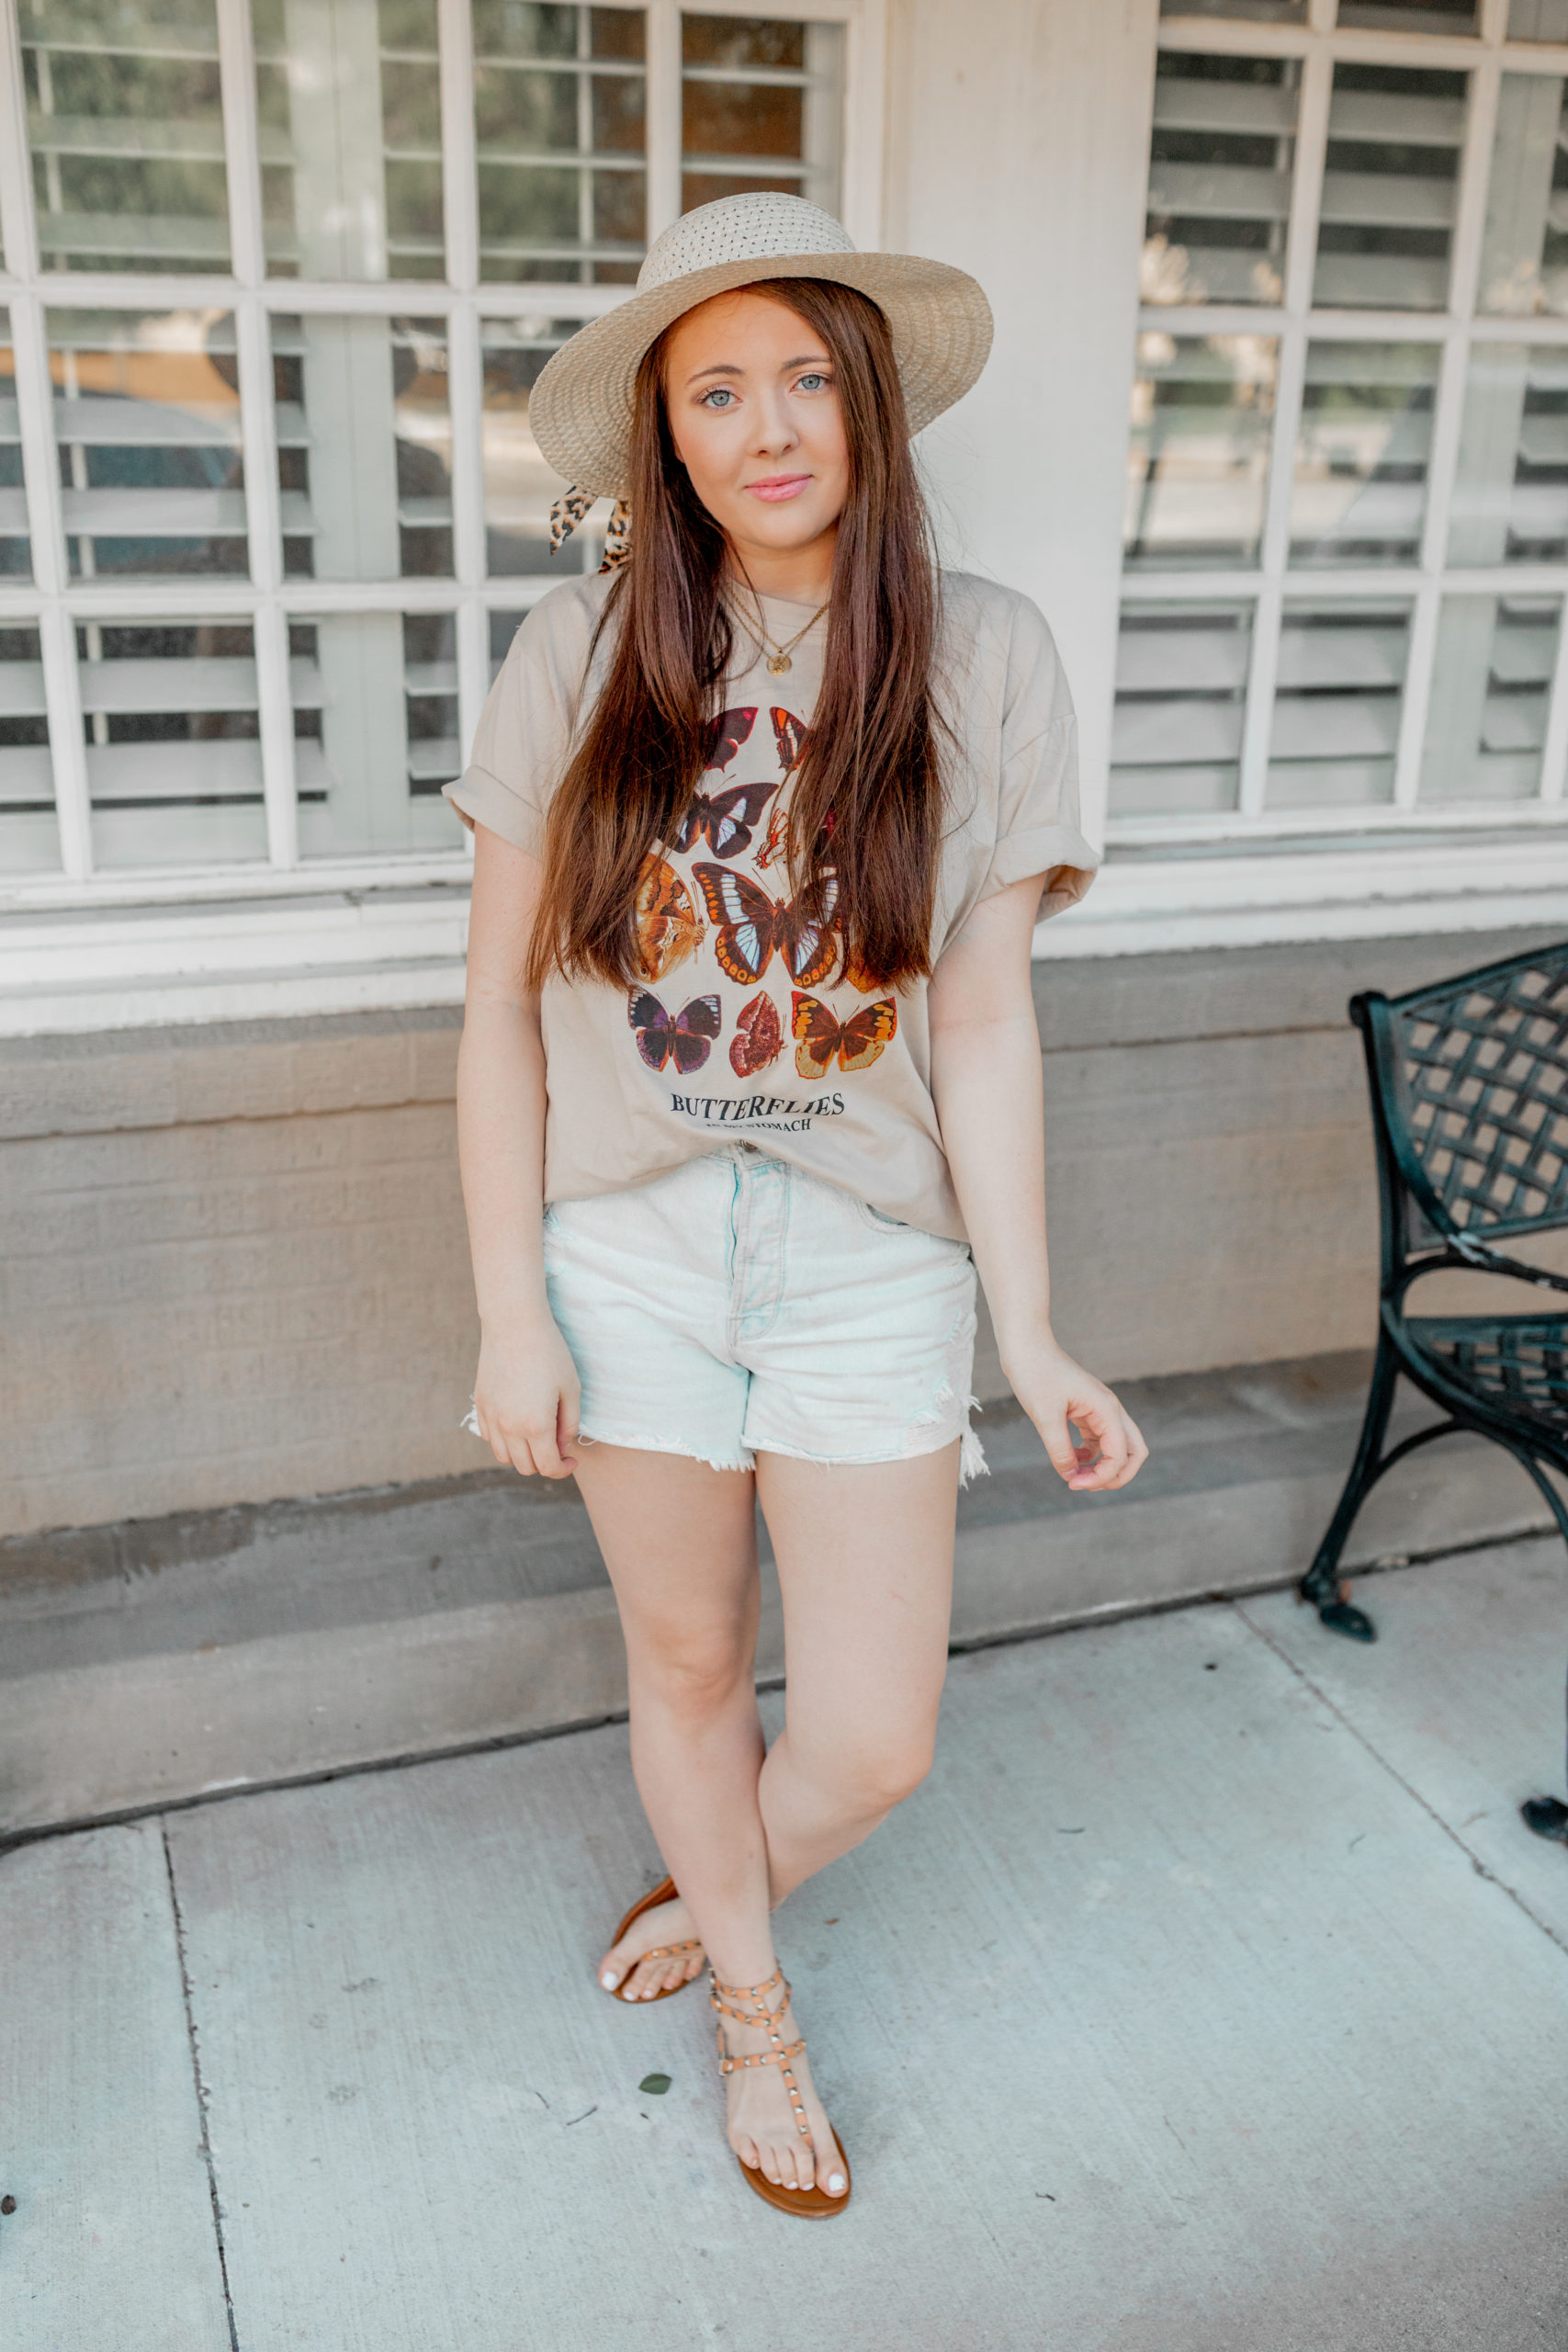 Styling Graphic Tees For Summer! (My Favorites Under $50) | Simply Stylish